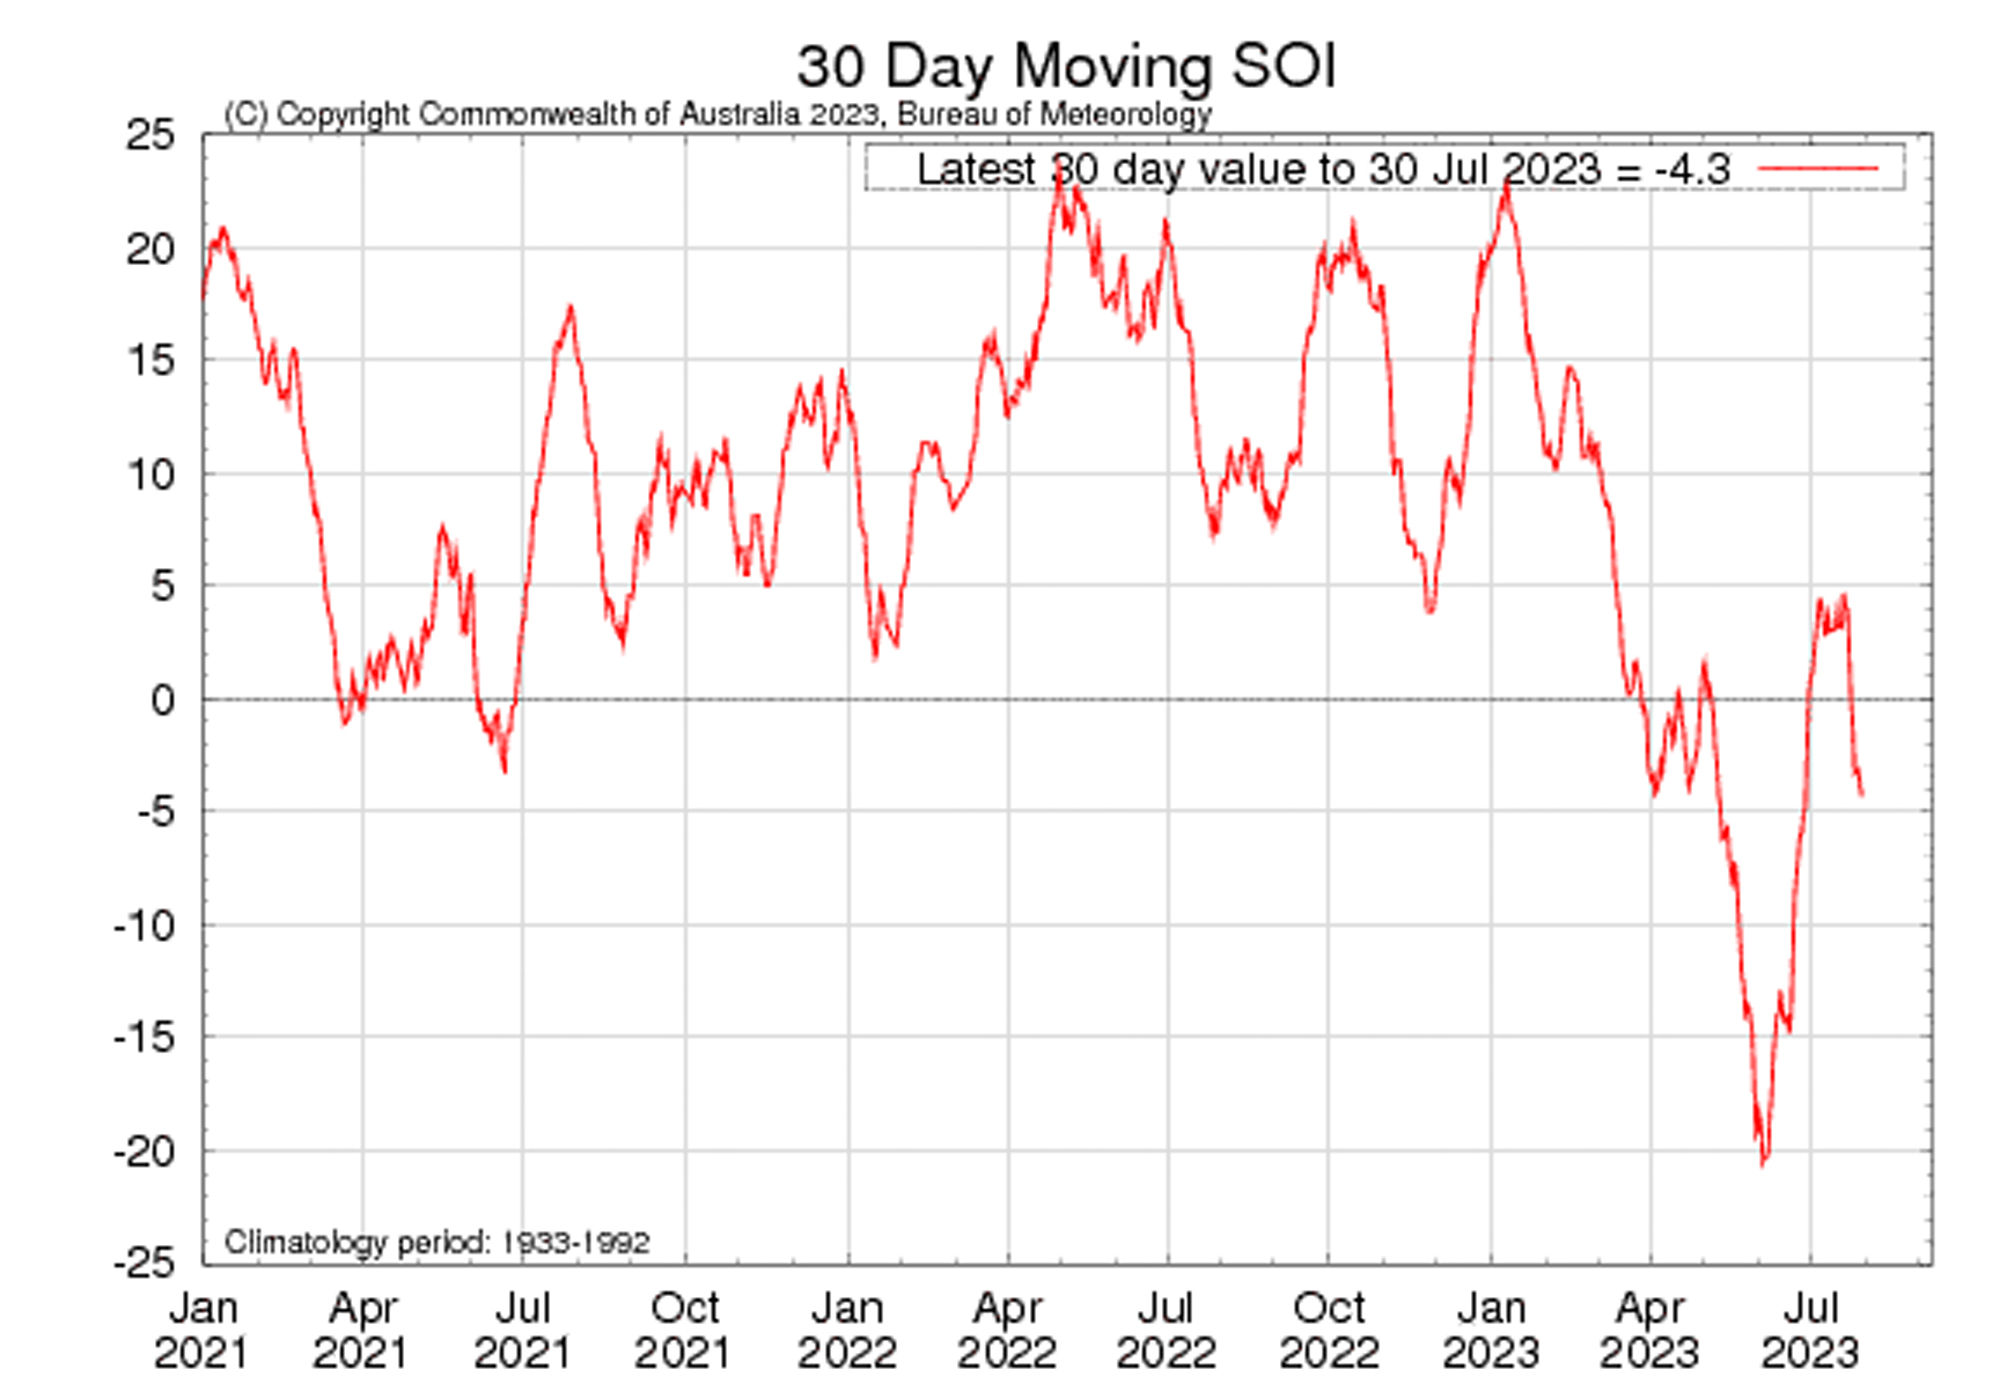 Figure 13. Latest 30-day moving SOI sourced from Australian Bureau of Meteorology on 1 August 2023